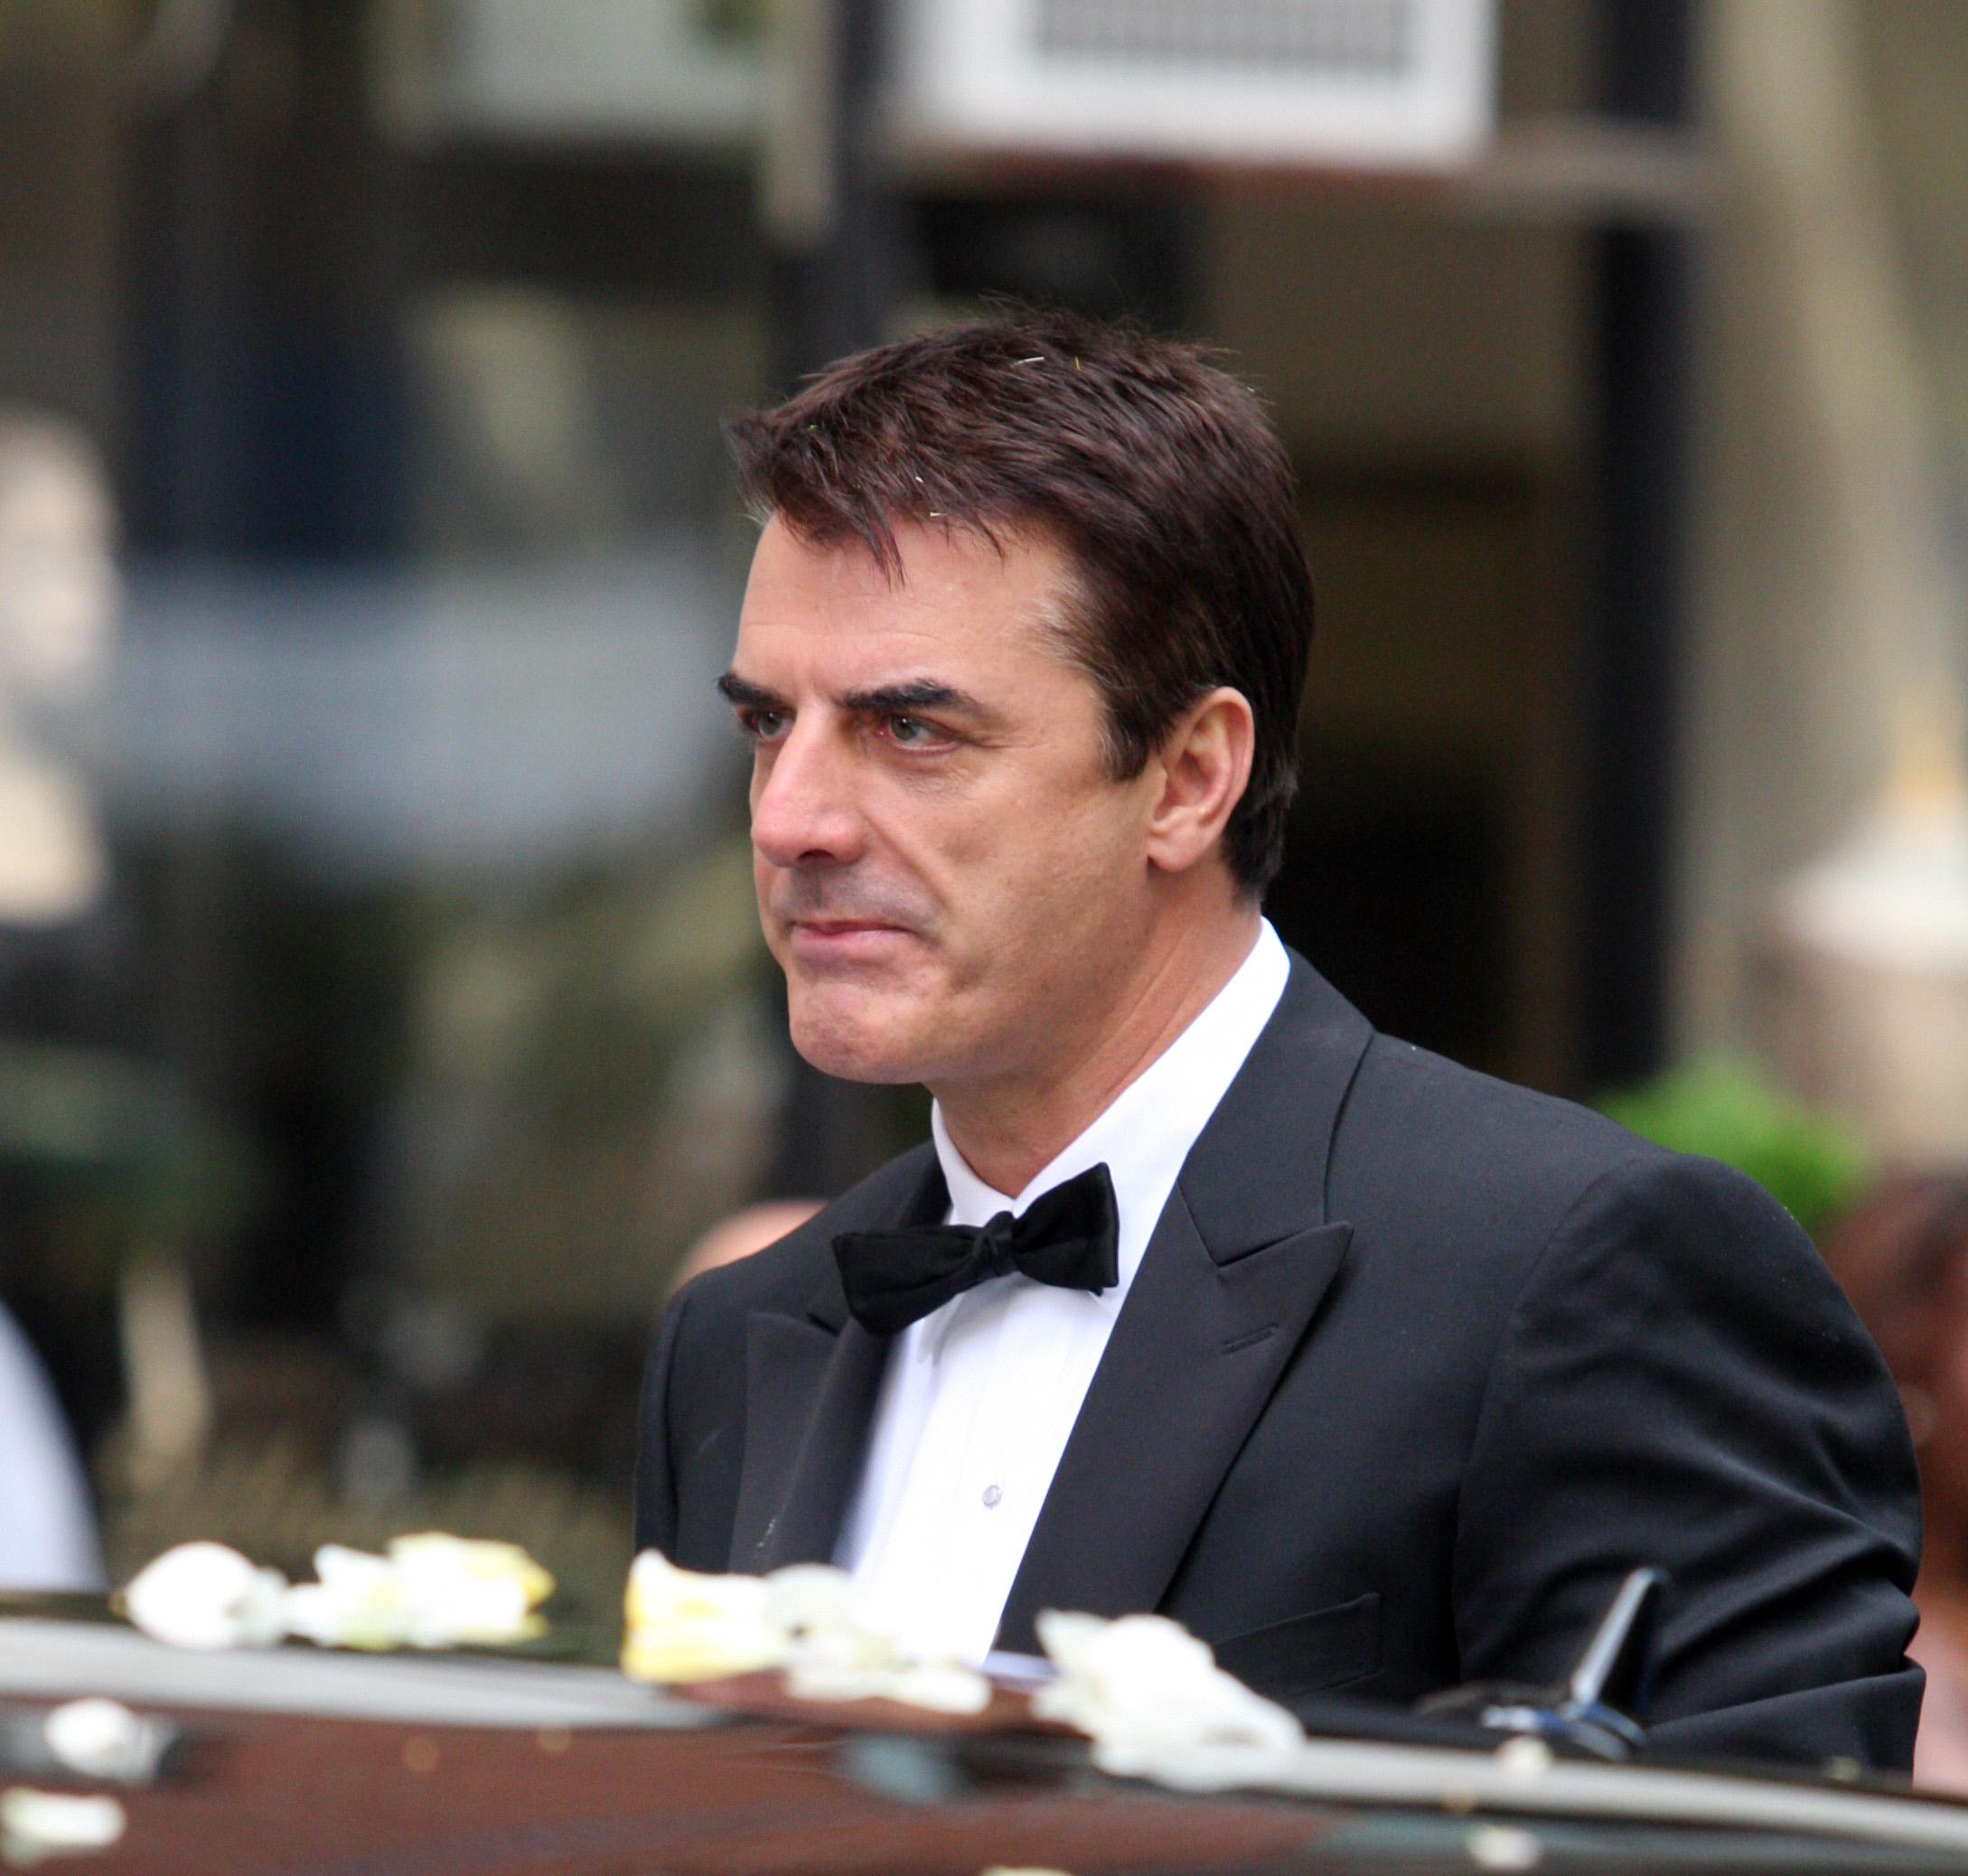 Chris Noth On Location for Sex and the City